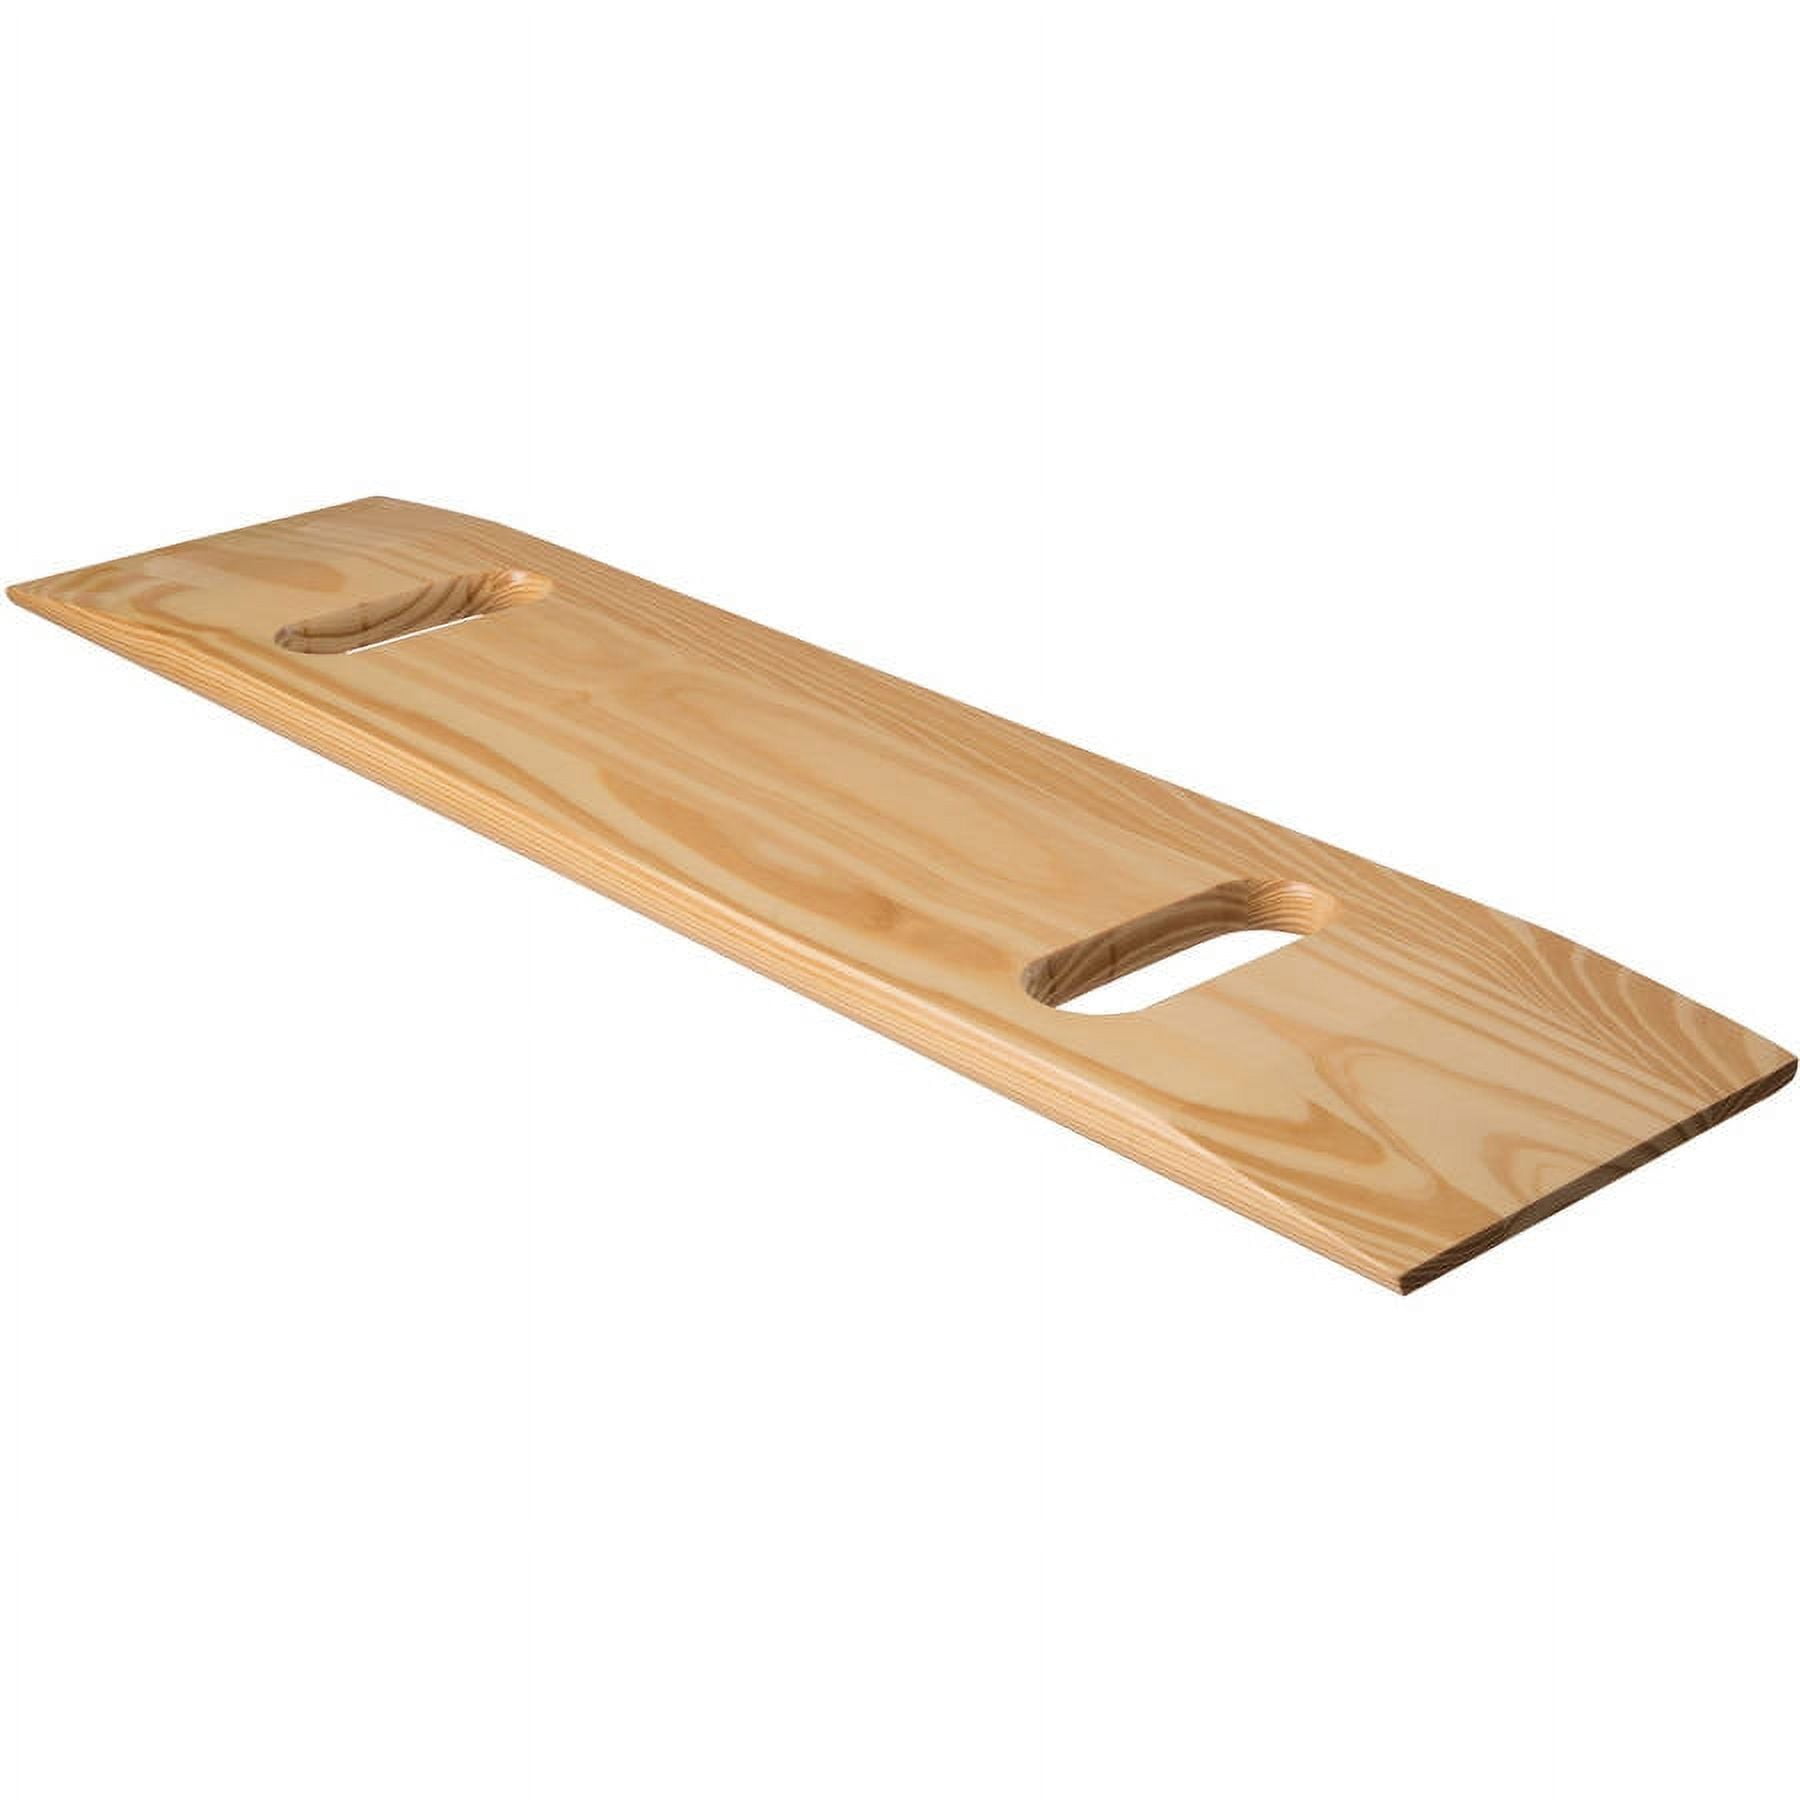 DMI Transfer Board and Slide Board, FSA Eligible, Made of Heavy-Duty Wood  for Patient, Senior and Handicap Move Assist and Slide Transfers, Holds up